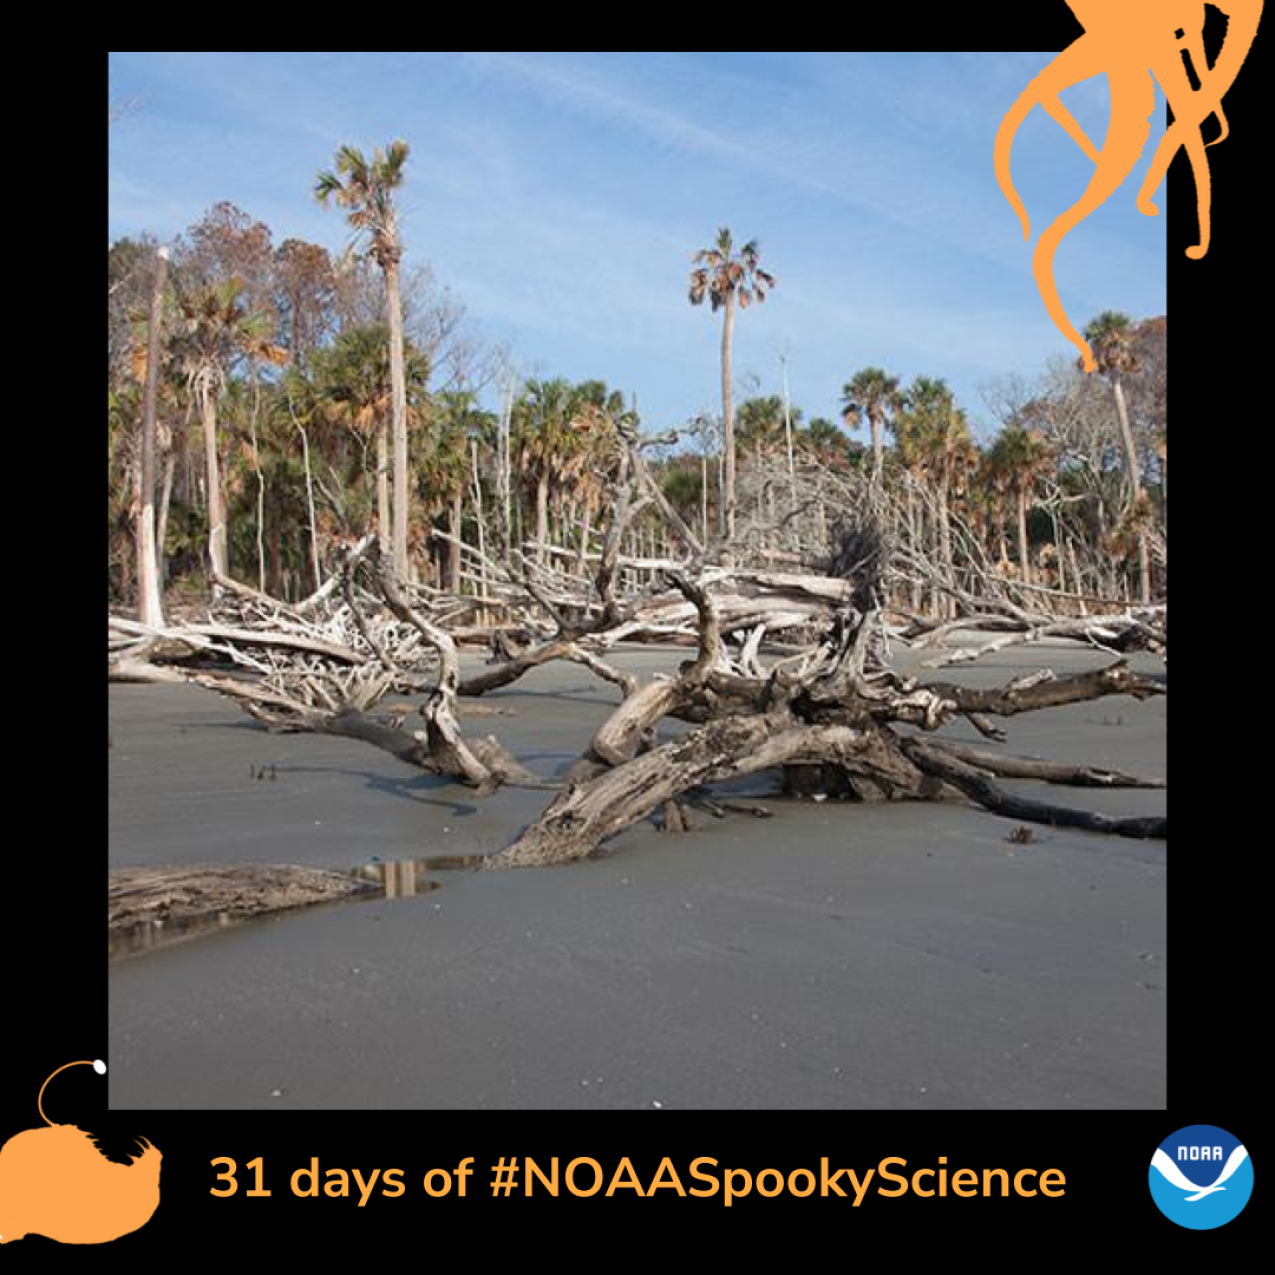 The watery remains of a once verdant woodland. Dead trees and broken limbs fill the beach. Border of the photo is black with orange sea creature graphics of octopus tentacles and an anglerfish. Text: 31 days of #NOAASpookyScience